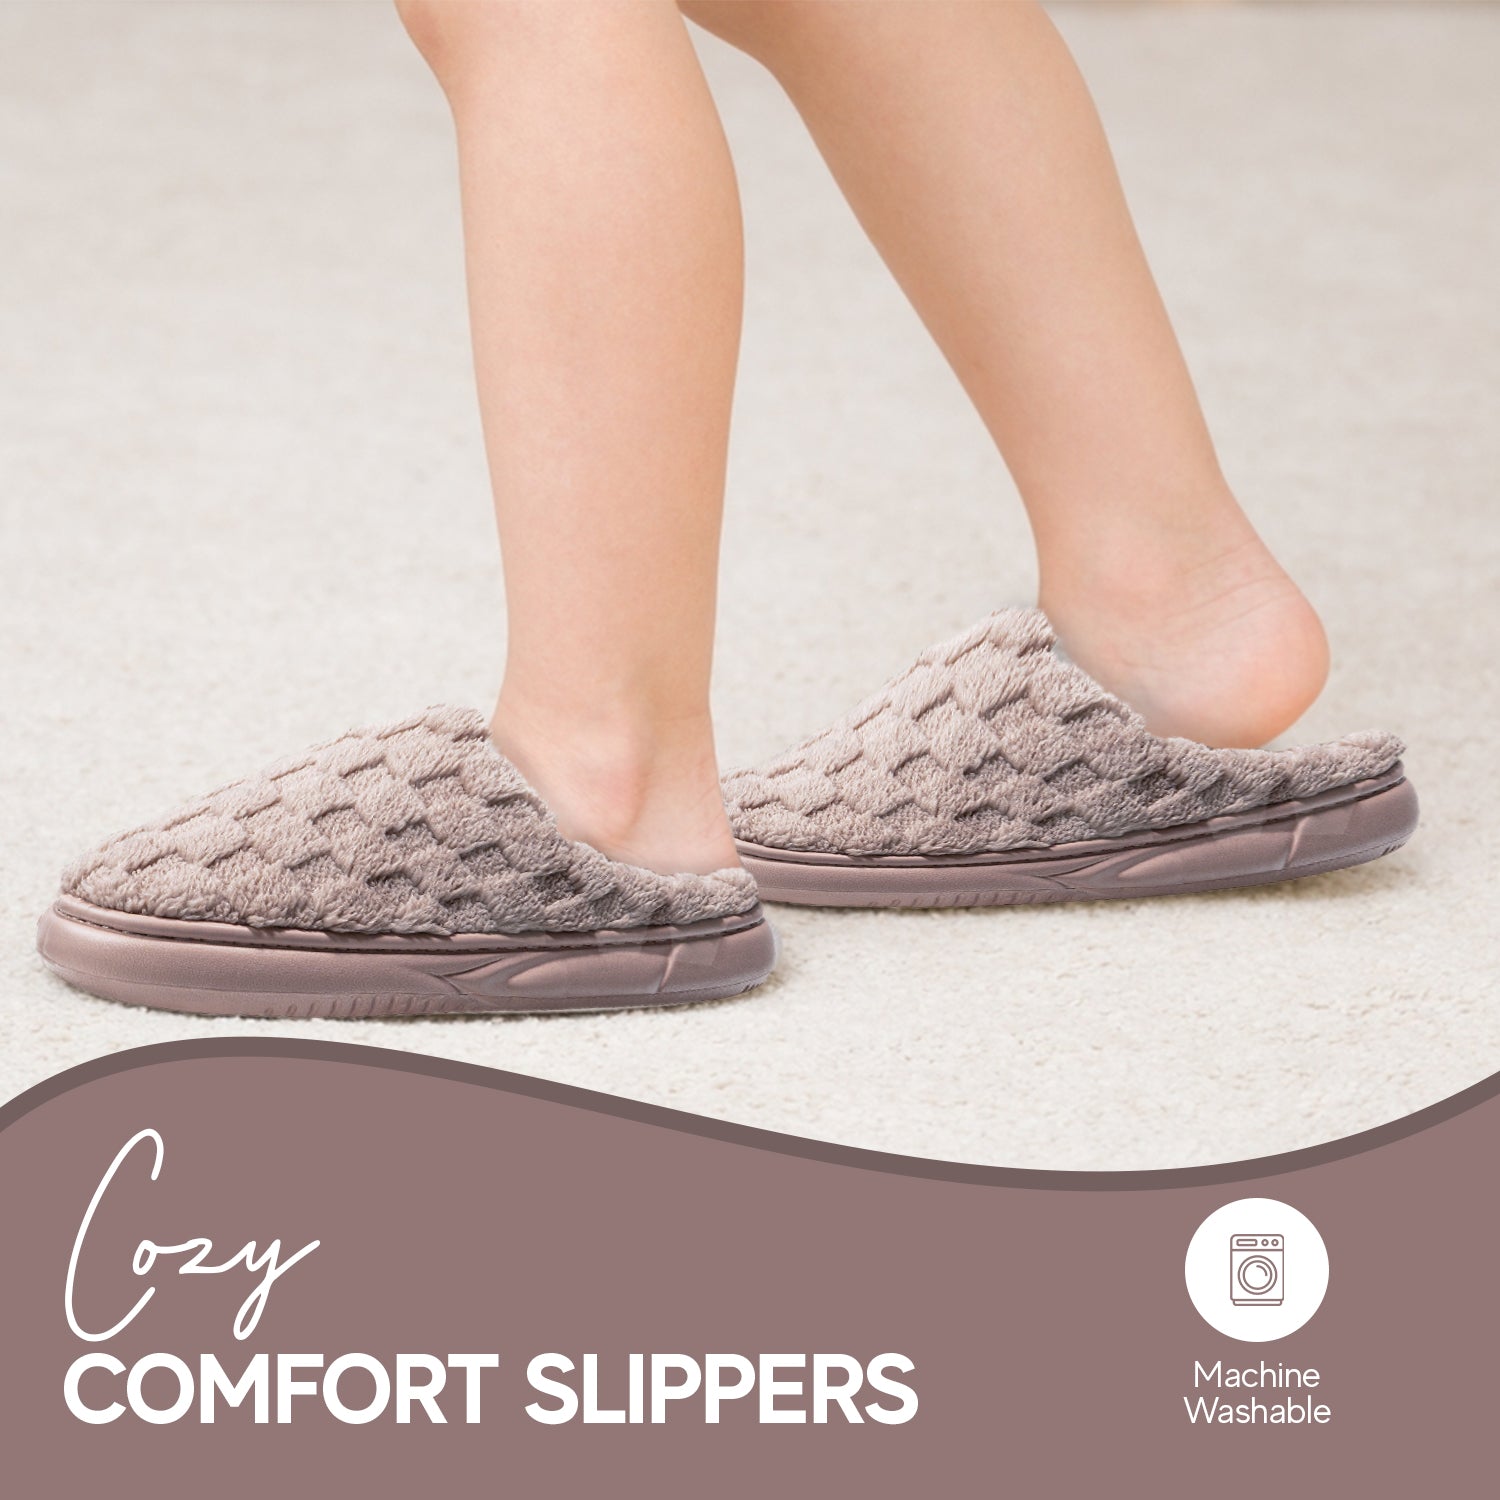 DIUS Brown Slippers for Women and Men: Embrace Unmatched Comfort with Memory Foam, Luxurious Plush Faux Fur, and Enhanced Safety Features including a Non-Slip Sole for Secure Indoor Comfort